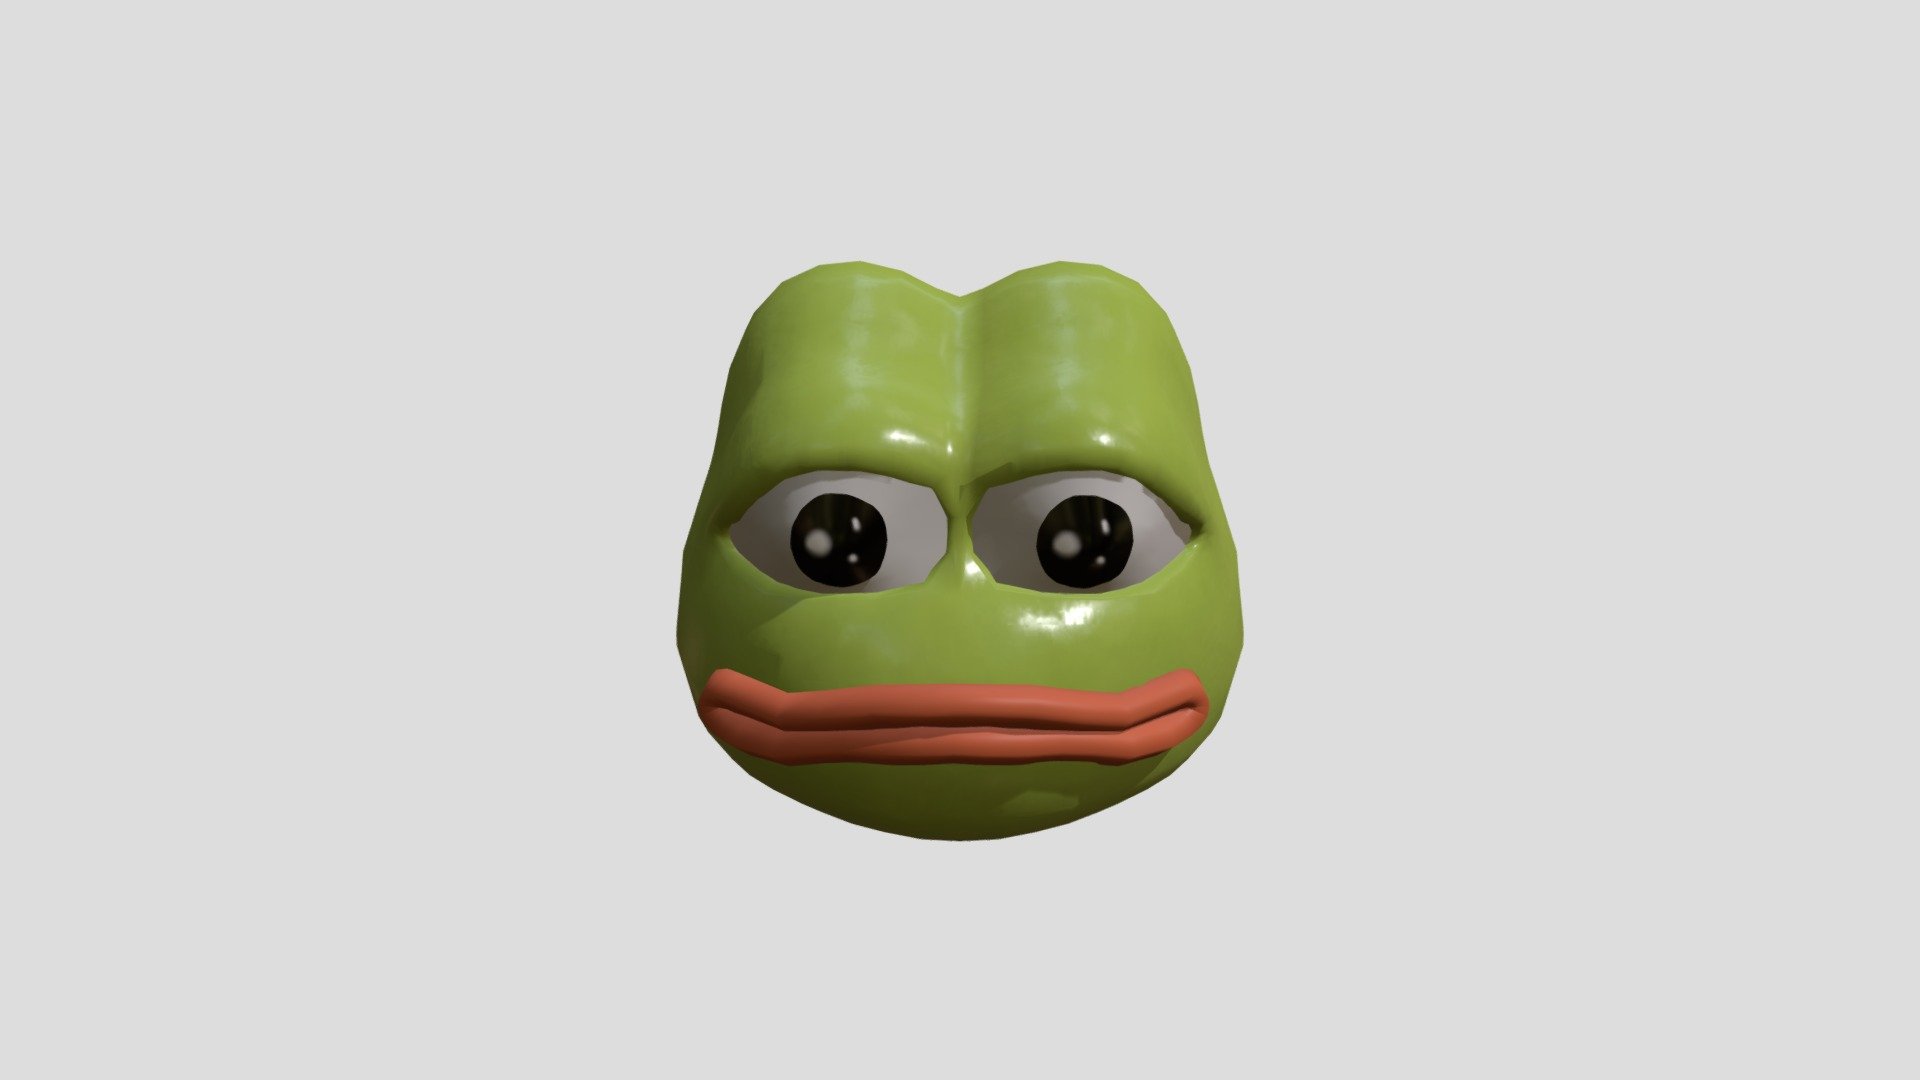 Low poly pepe head made in blender.
Perfect for use in memes, animations, or as a unique decor item in your digital creations - Pepe head - Download Free 3D model by barkovskis 3d model